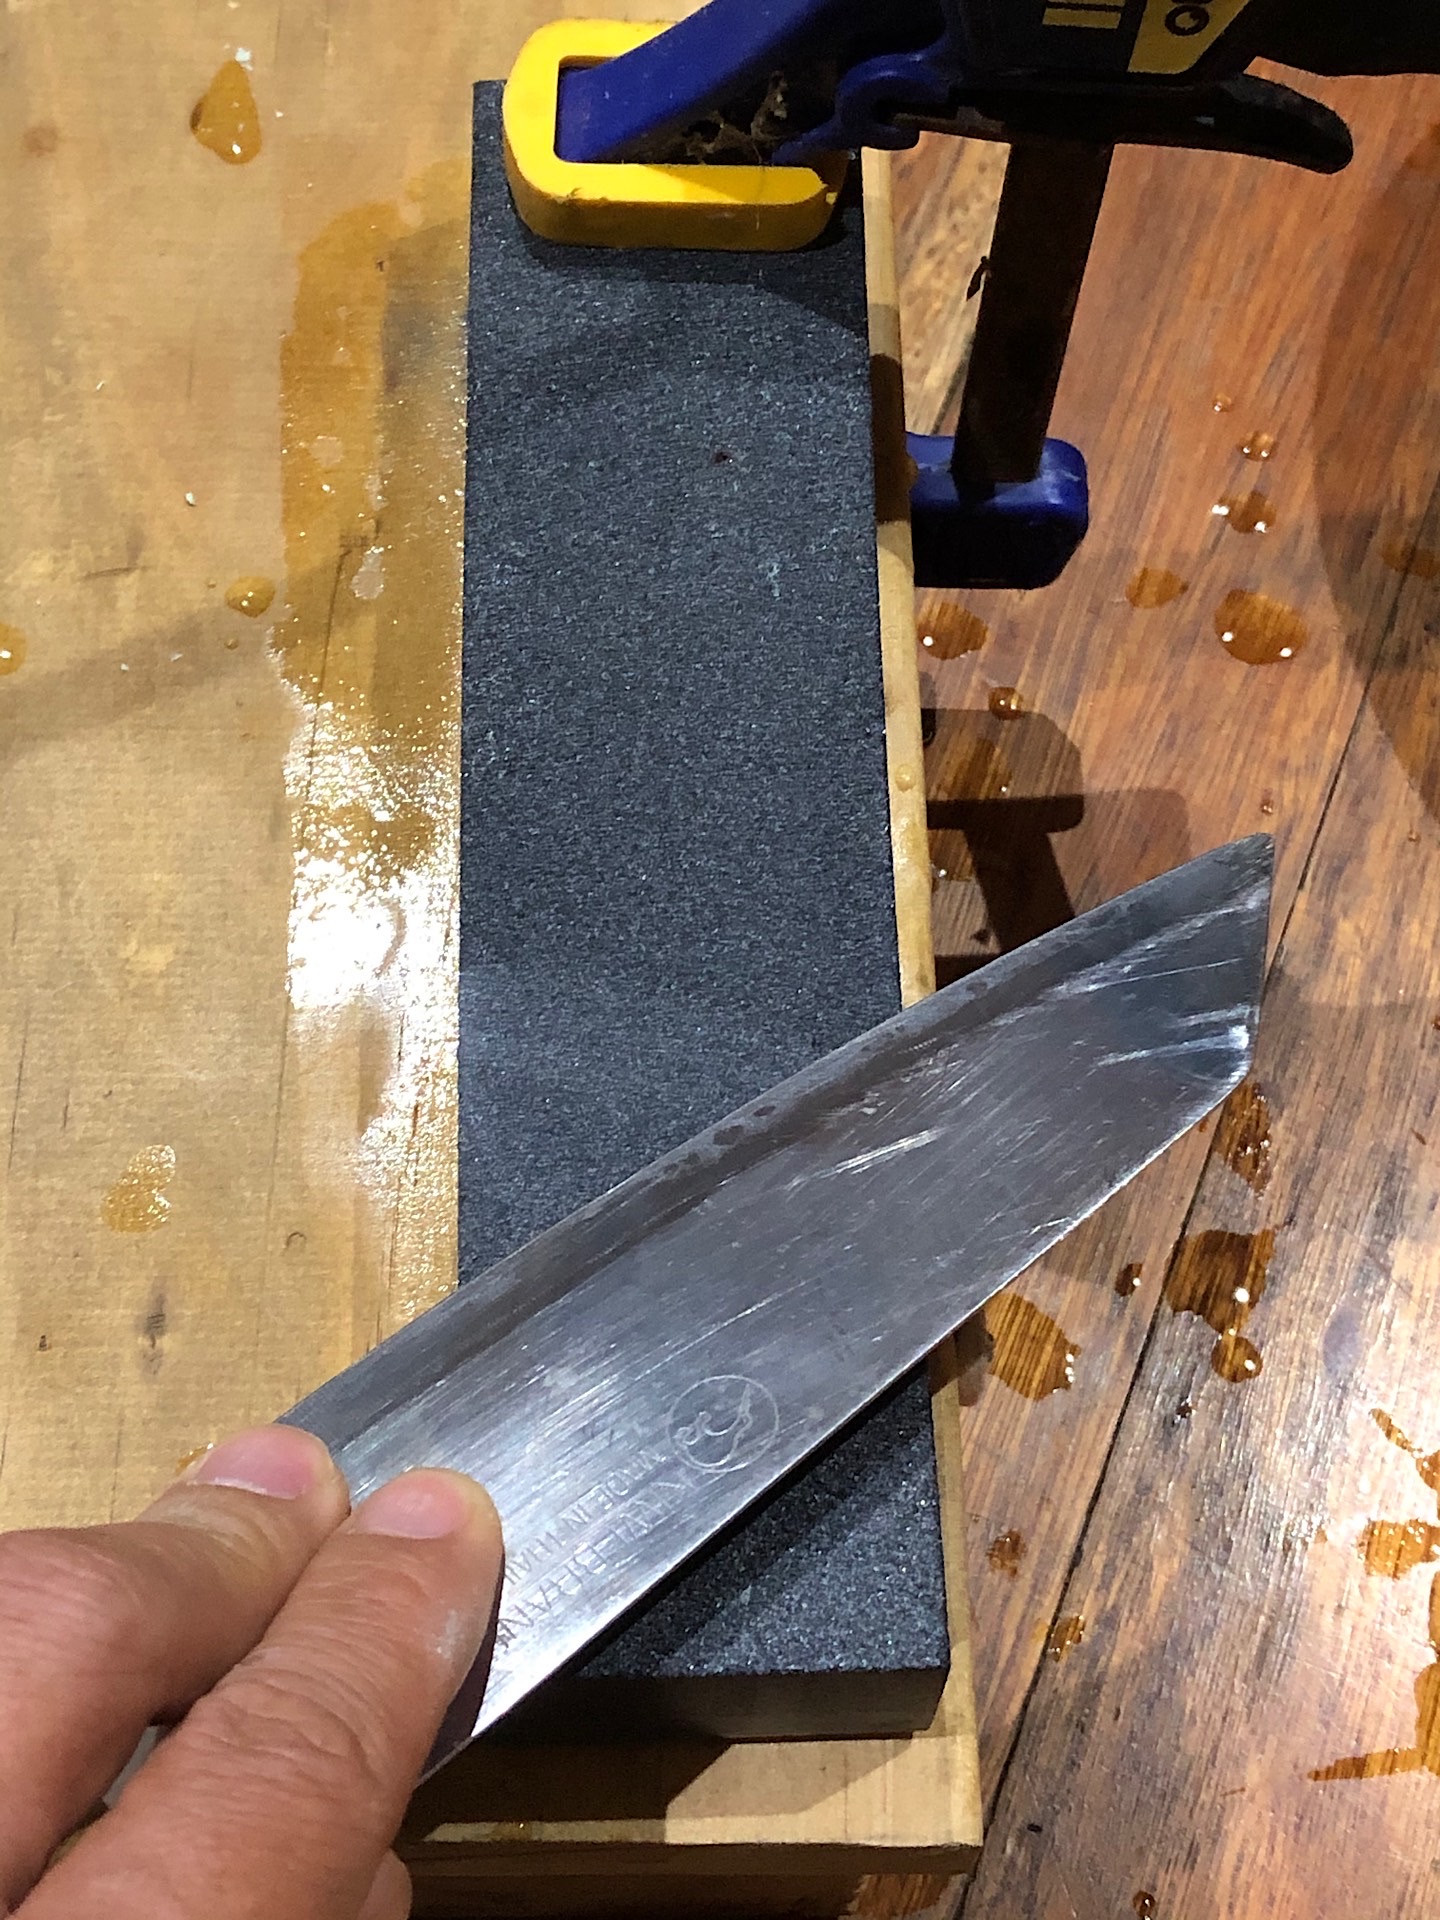 Learning how to sharpen a knife — Hive